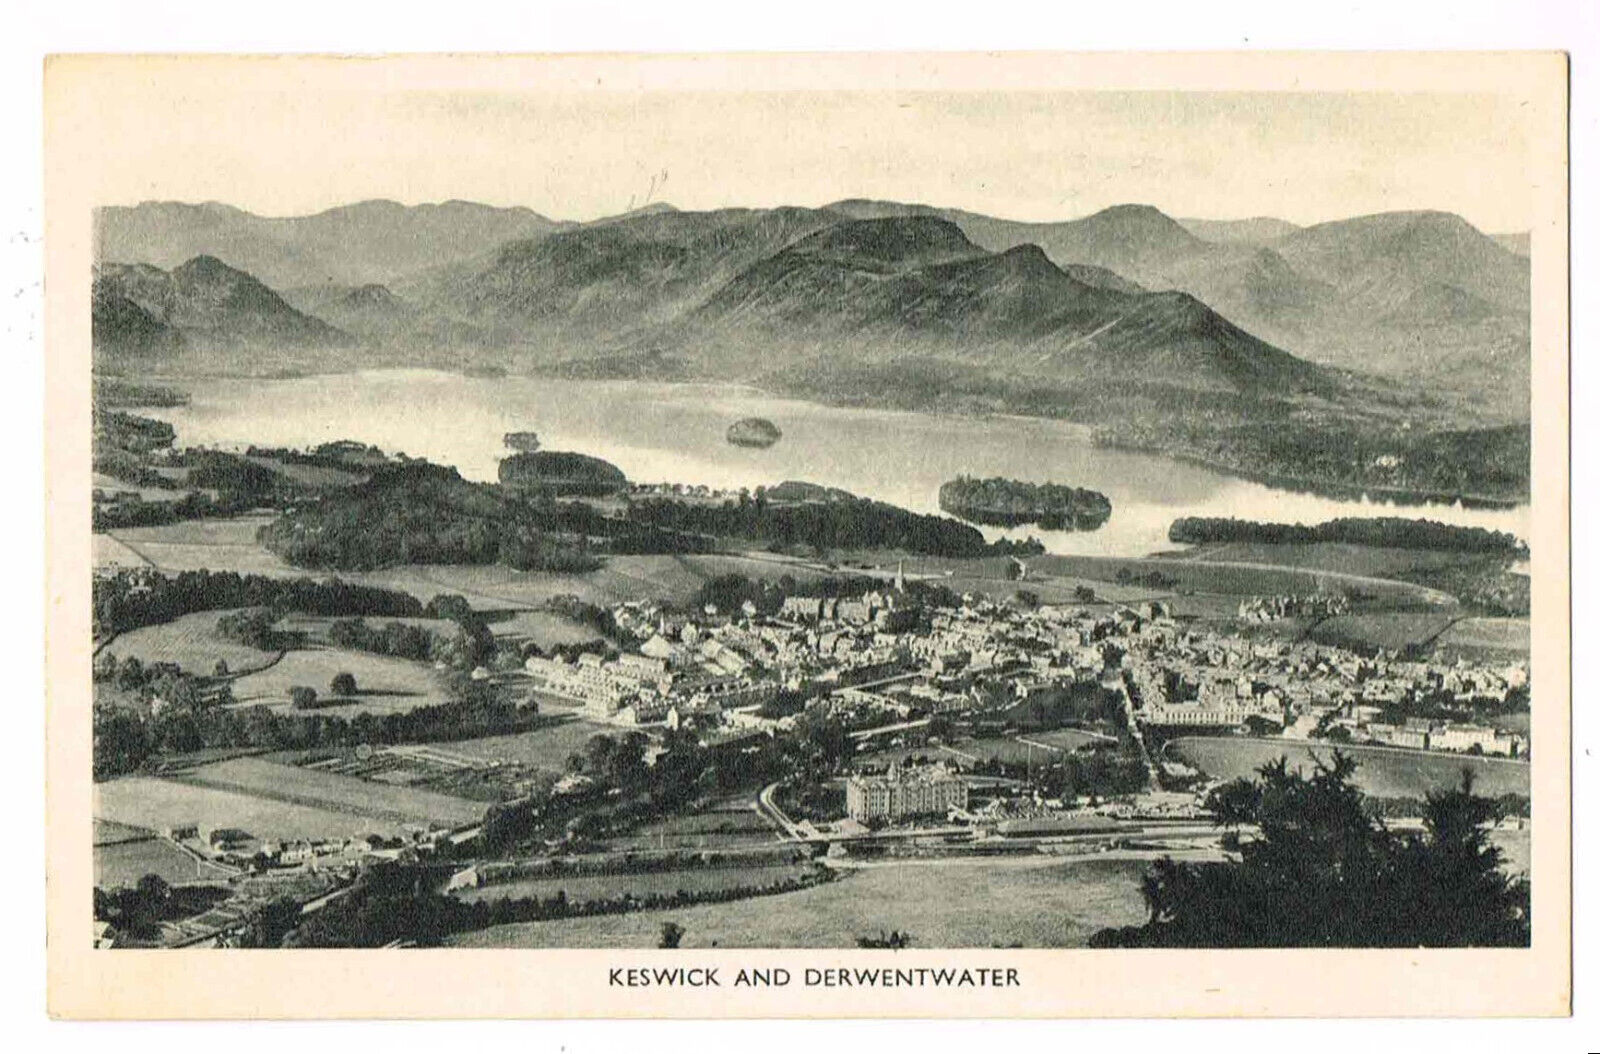 House Clearance - UK - POSTCARD - KESWICK AND DERWENTWATER